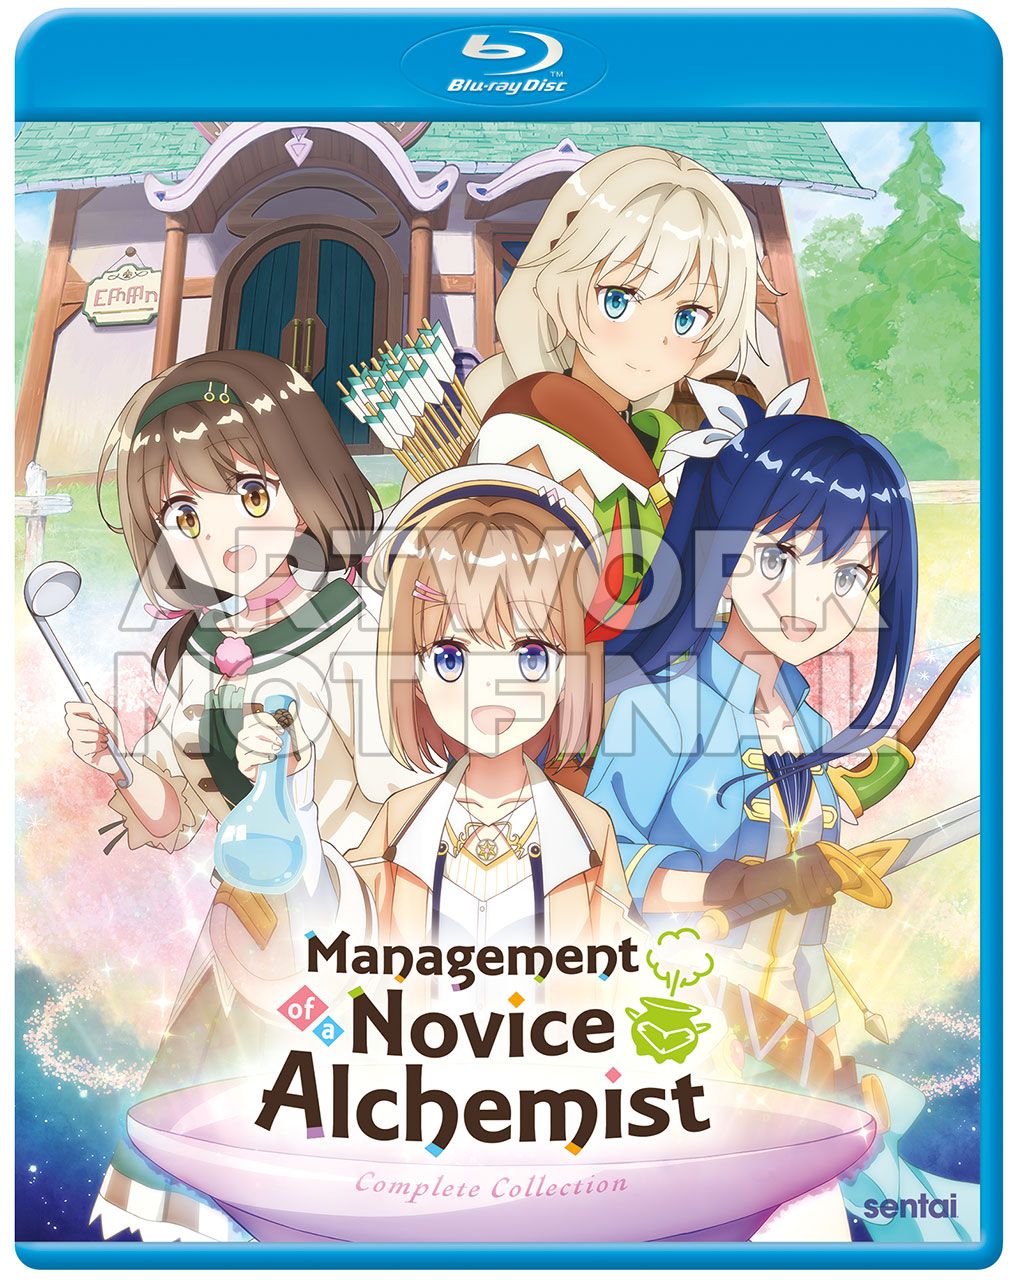 Management Of A Novice Alchemist Blu-ray. Cover art provided by Sentai Filmworks